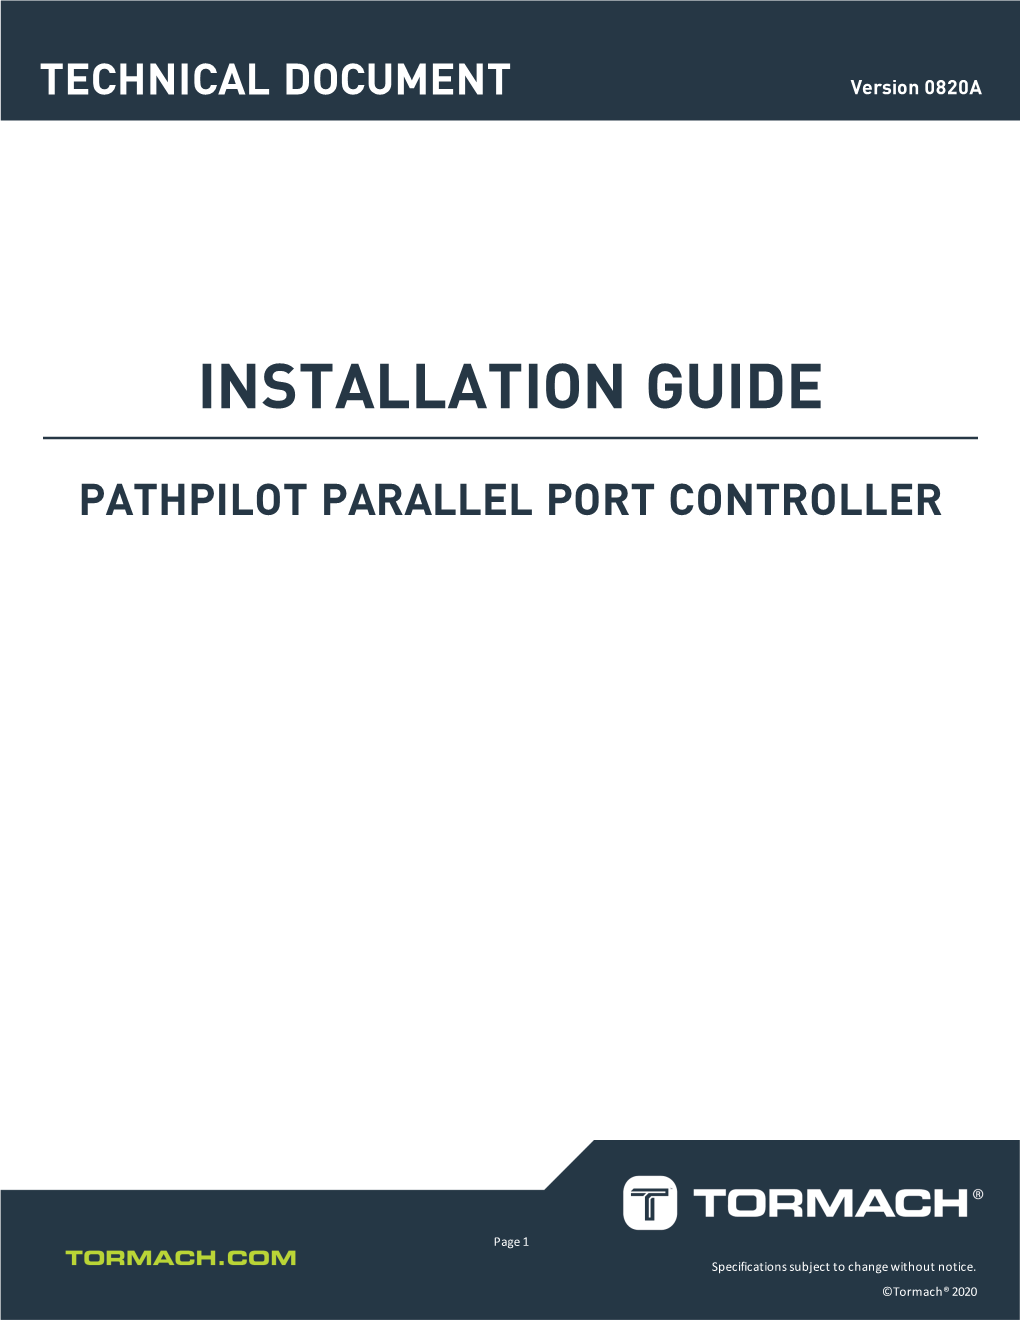 Installation Guide: Parallel Port Controller (0820A) TECHNICAL DOCUMENT